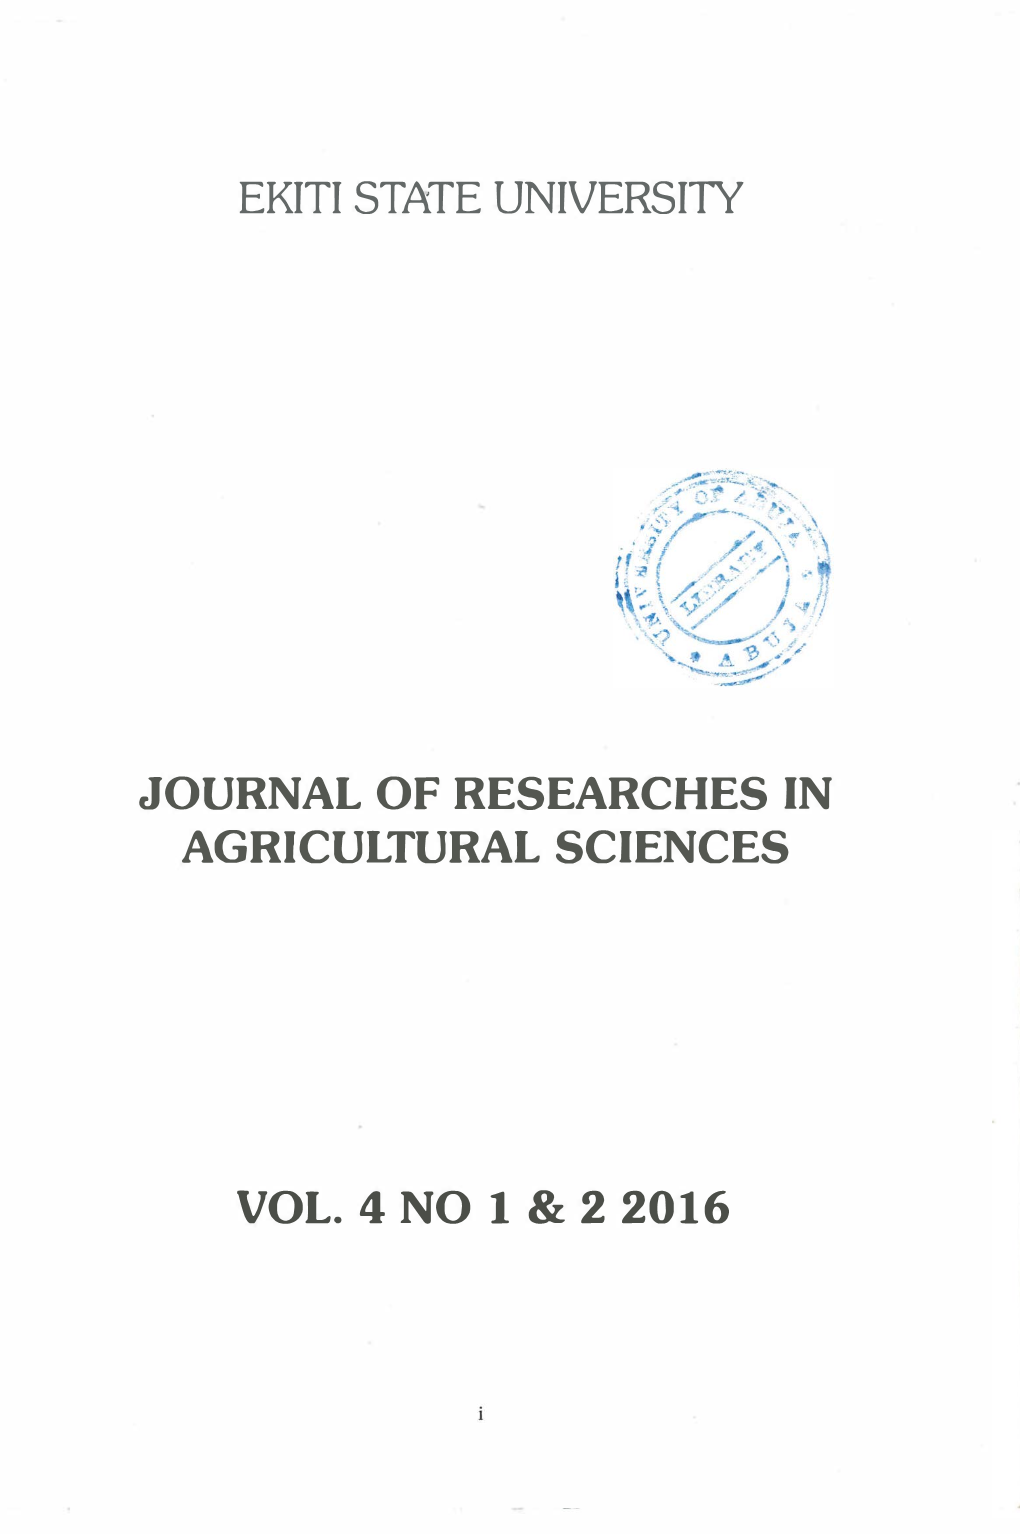 Journal of Researches in Agricultural Sciences